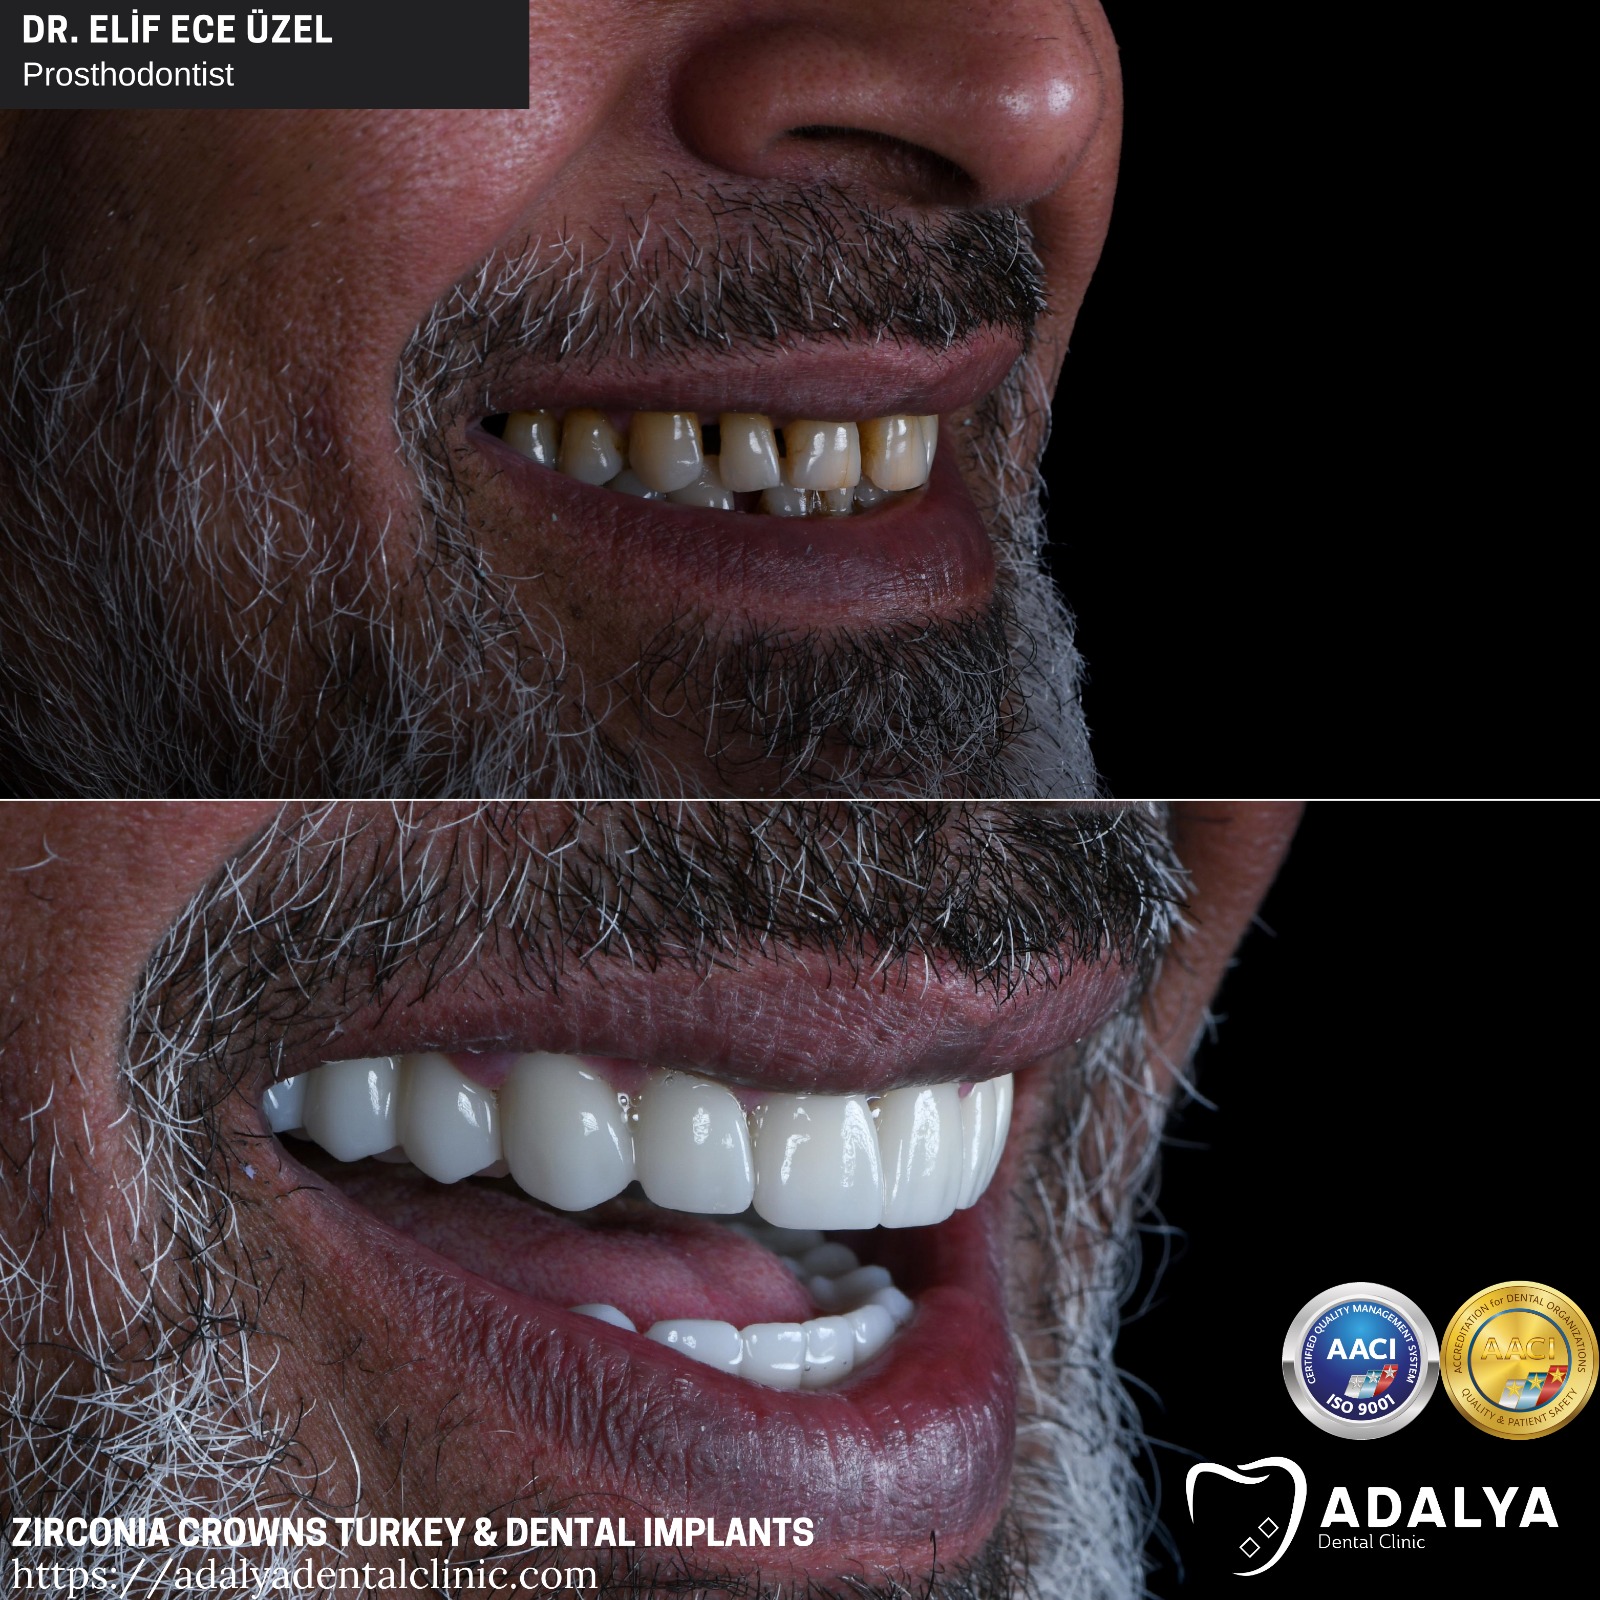 dental clinic turkey antalya zirconia crowns tooth implants cost price packages